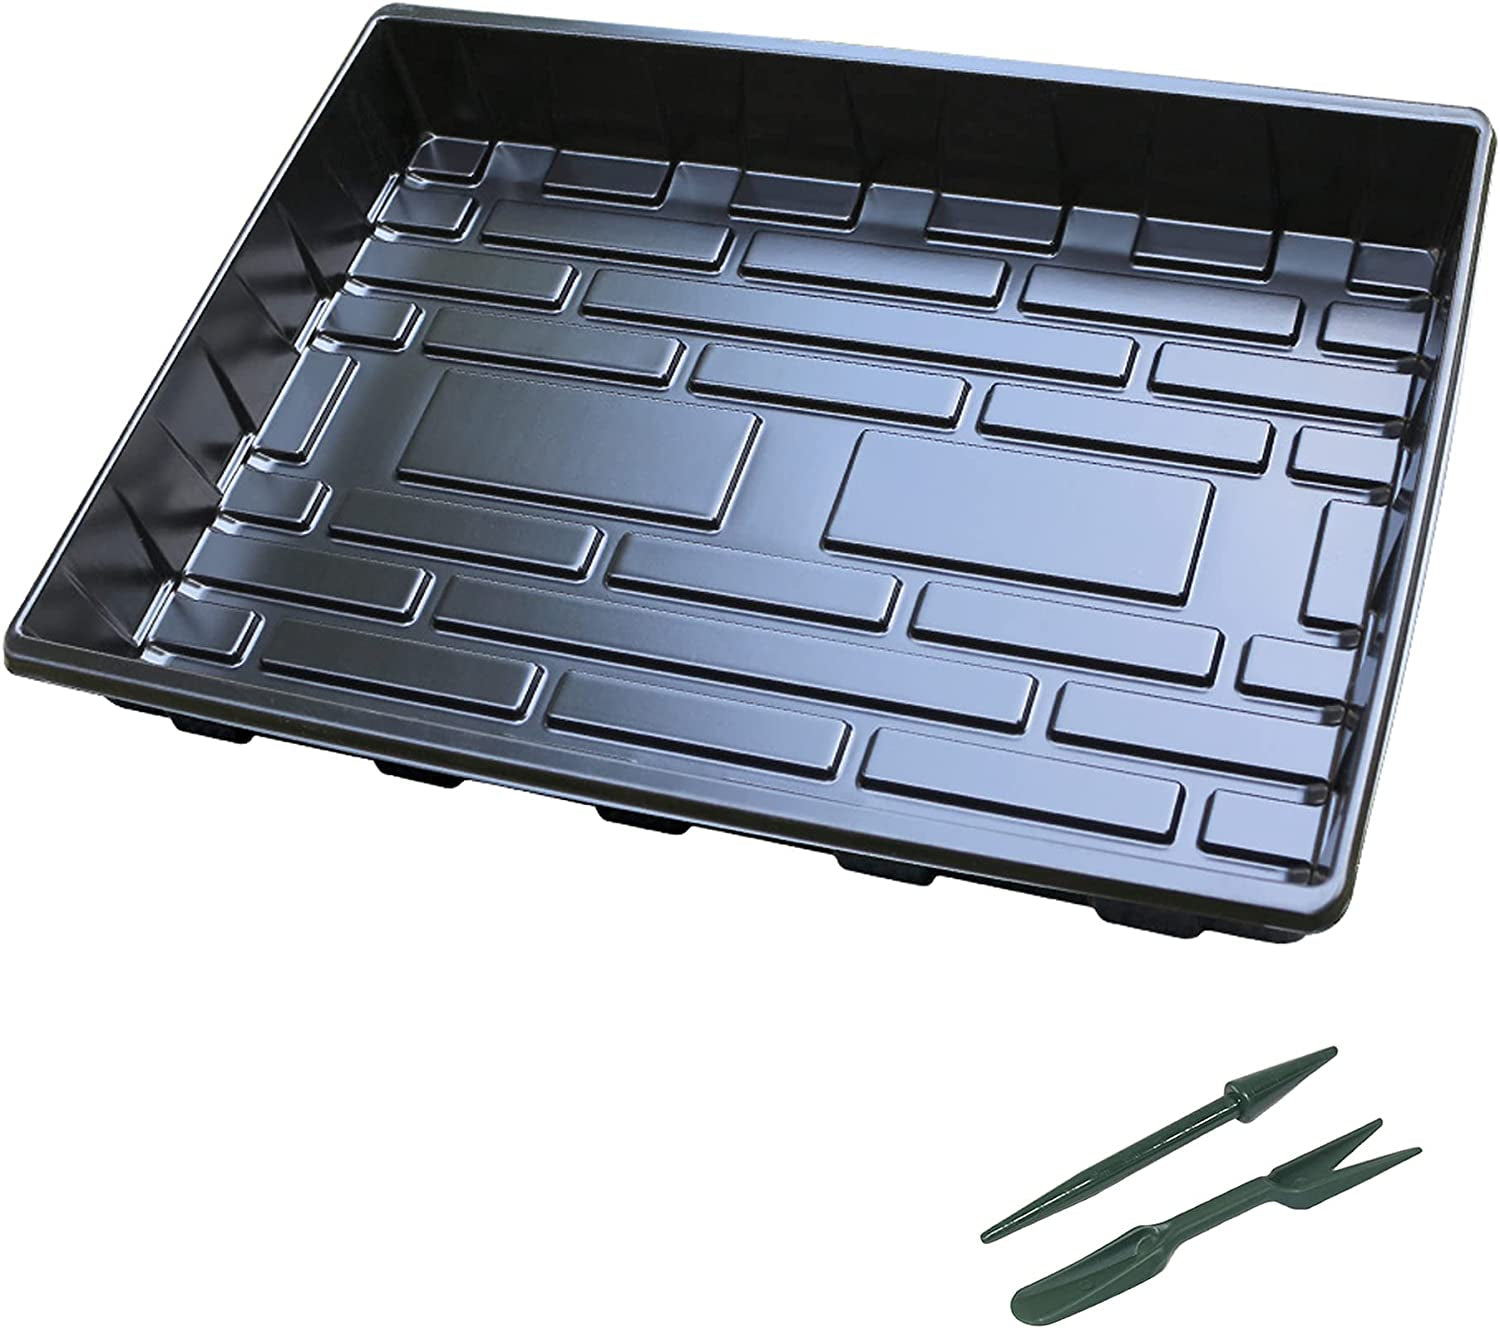 gardzen, Gardzen 5-Set Garden Propagator Set, Seed Tray Kits with 200-Cell, Seed Starter Tray with Dome and Base 15" X 9" (40-Cell per Tray)